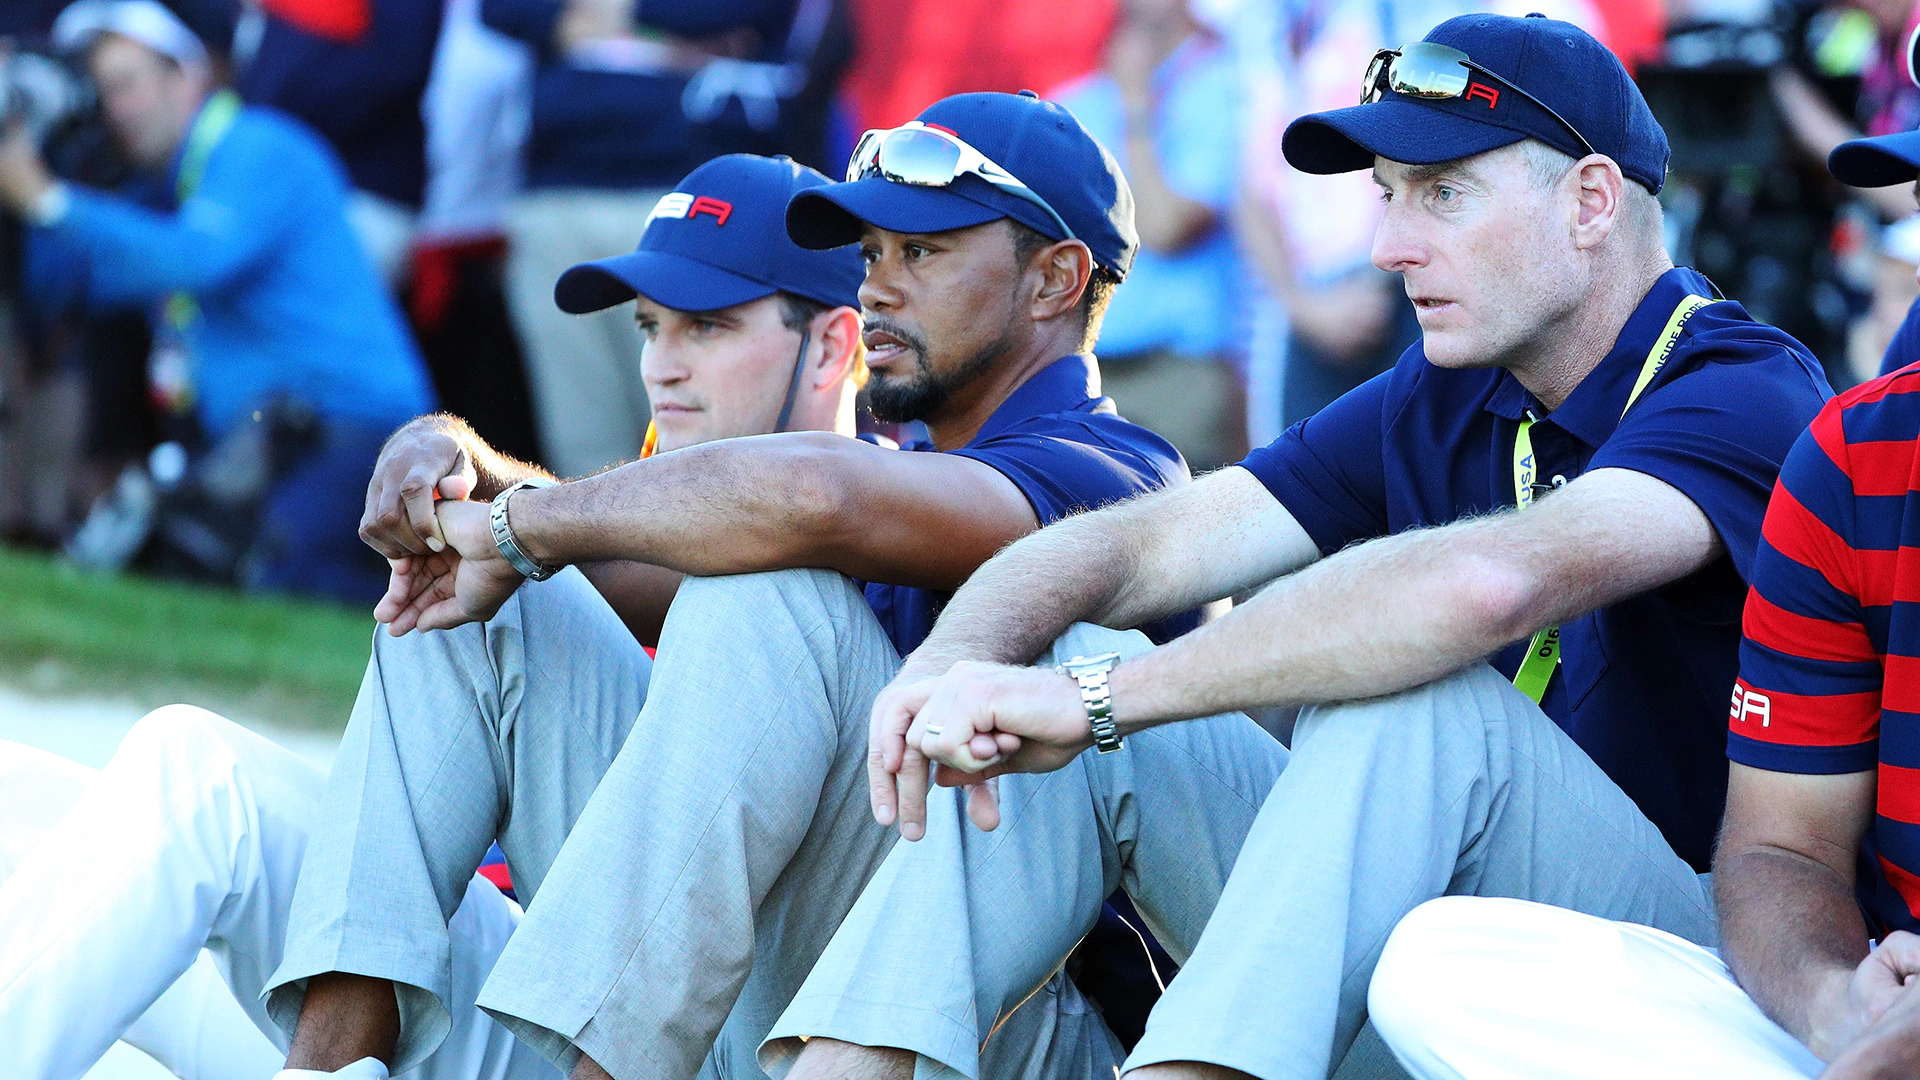 U.S. Ryder Cup captain Zach Johnson says Tiger Woods will be ‘part of this team in some capacity’